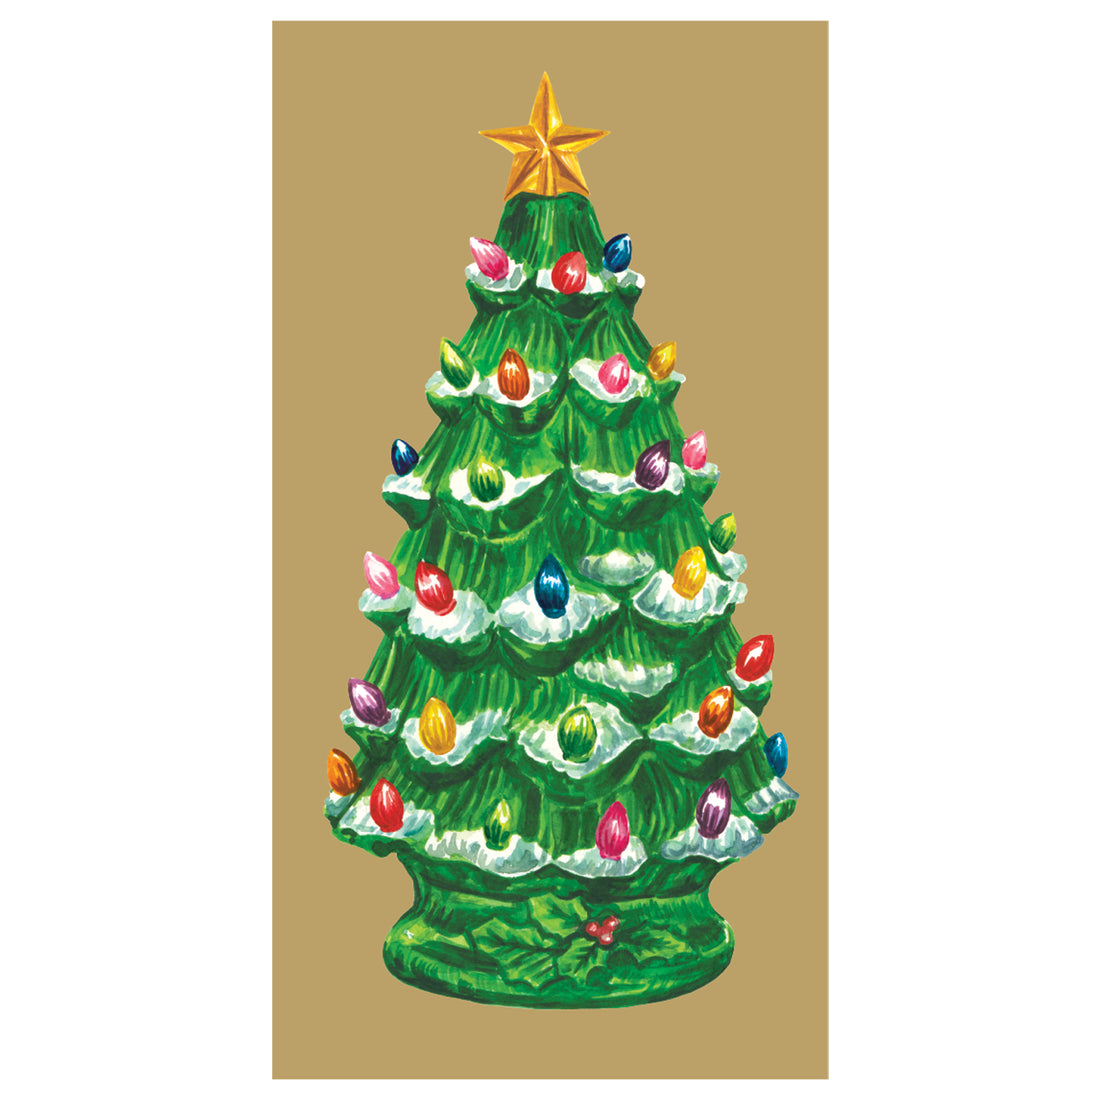 A rectangle, gold guest napkin featuring a vintage green ceramic Christmas tree decoration, complete with snow-tipped branches and multi-colored lights.